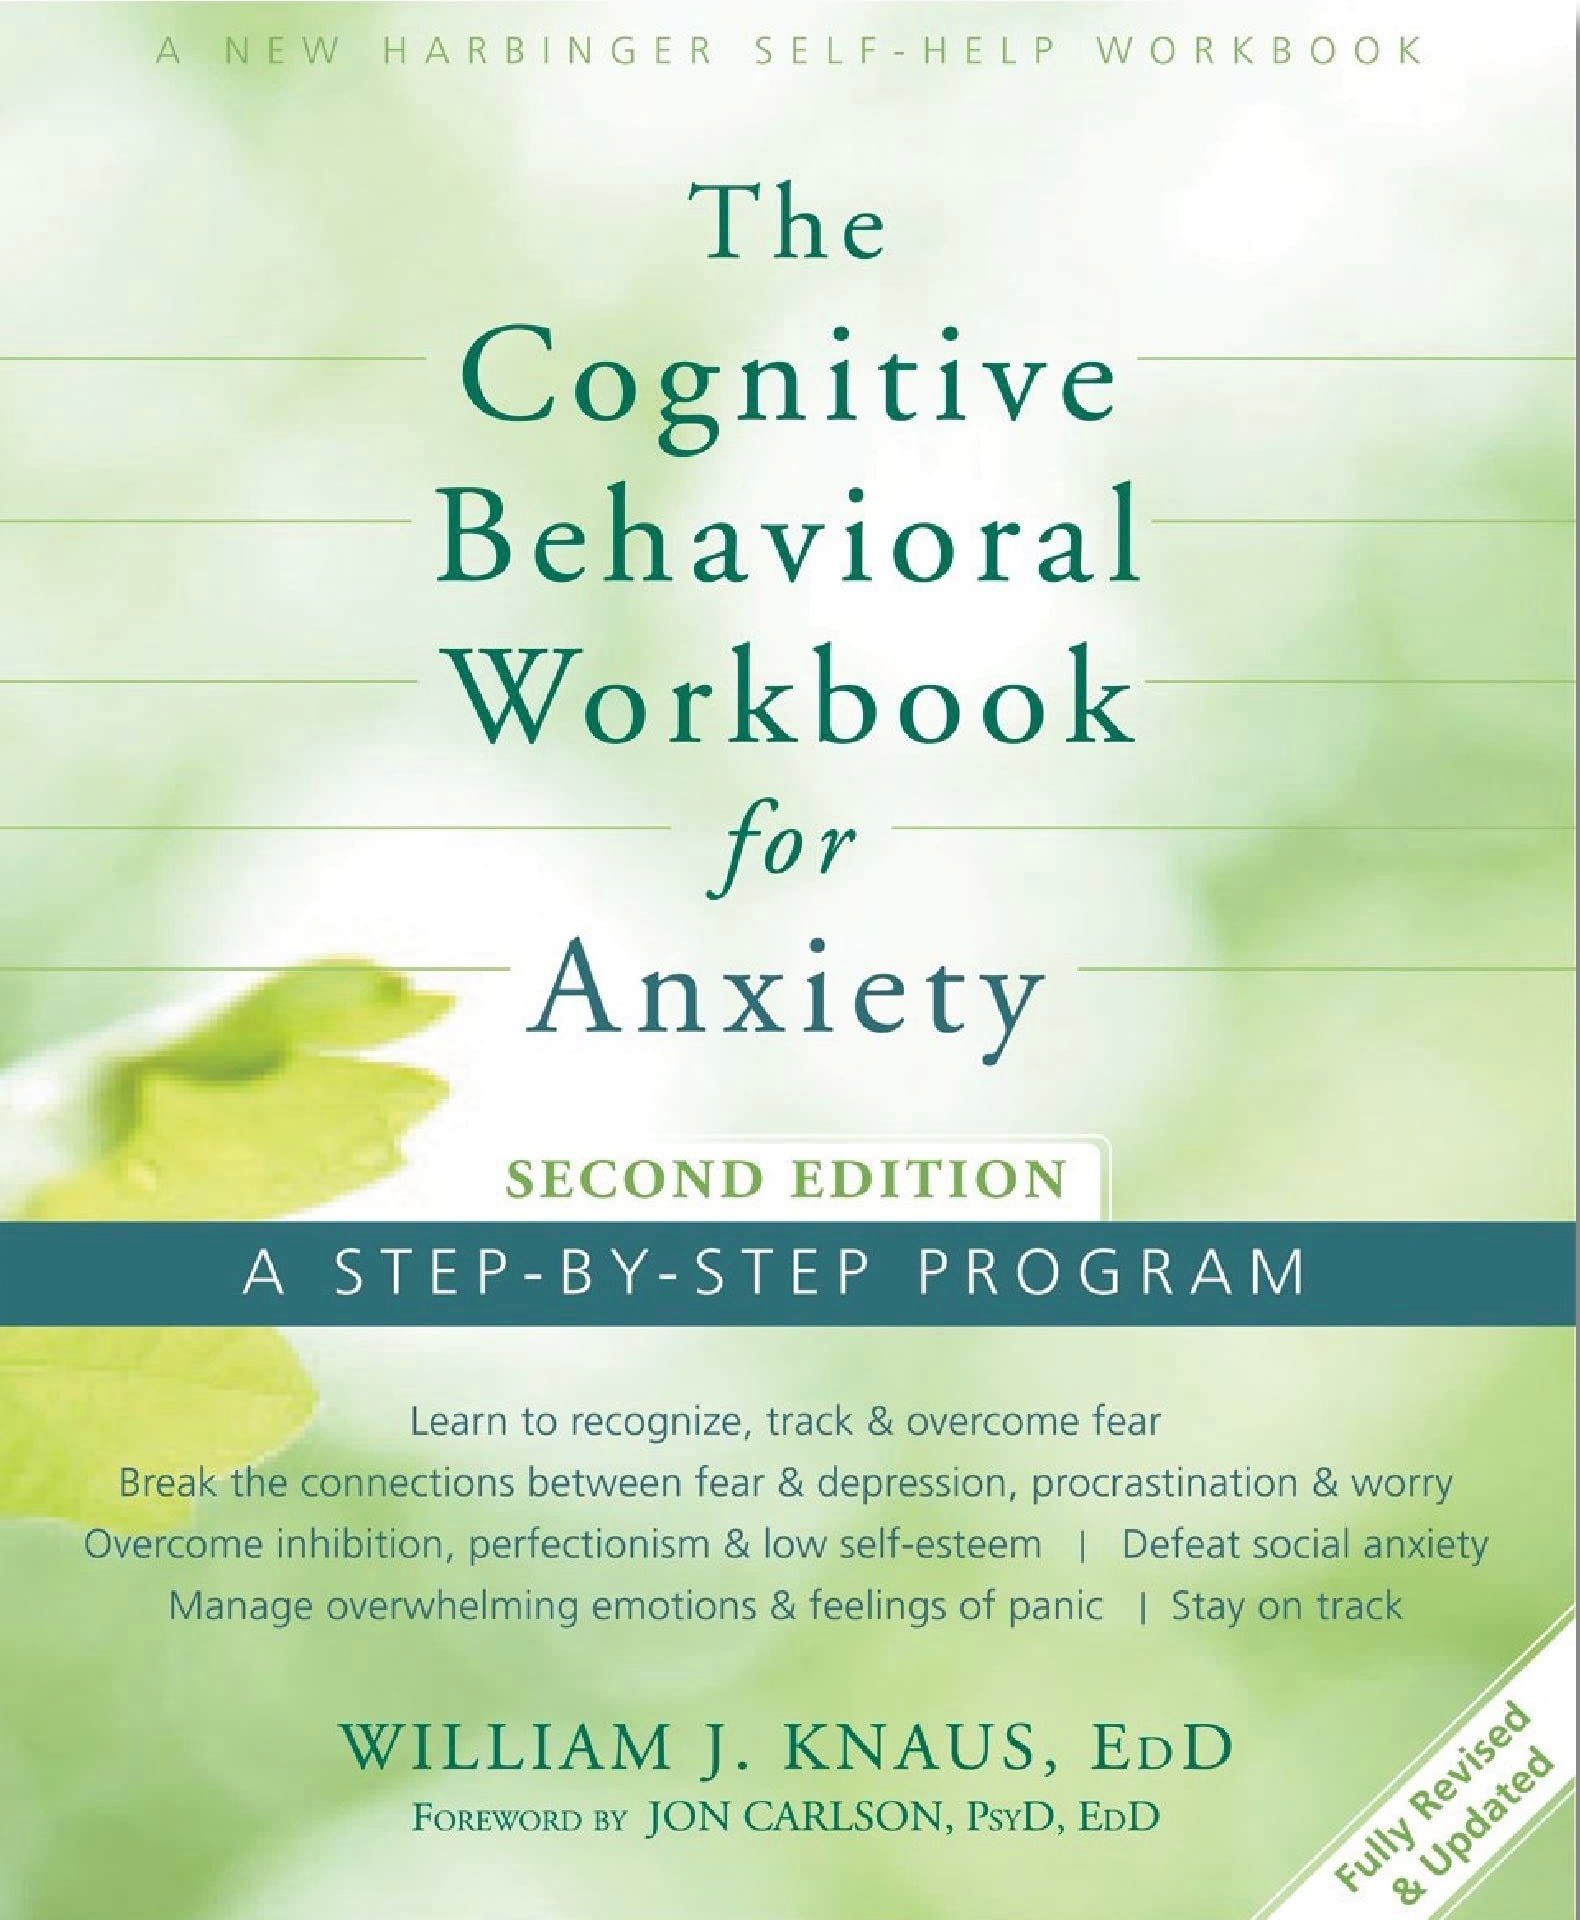 The CBT Workbook For Anxiety